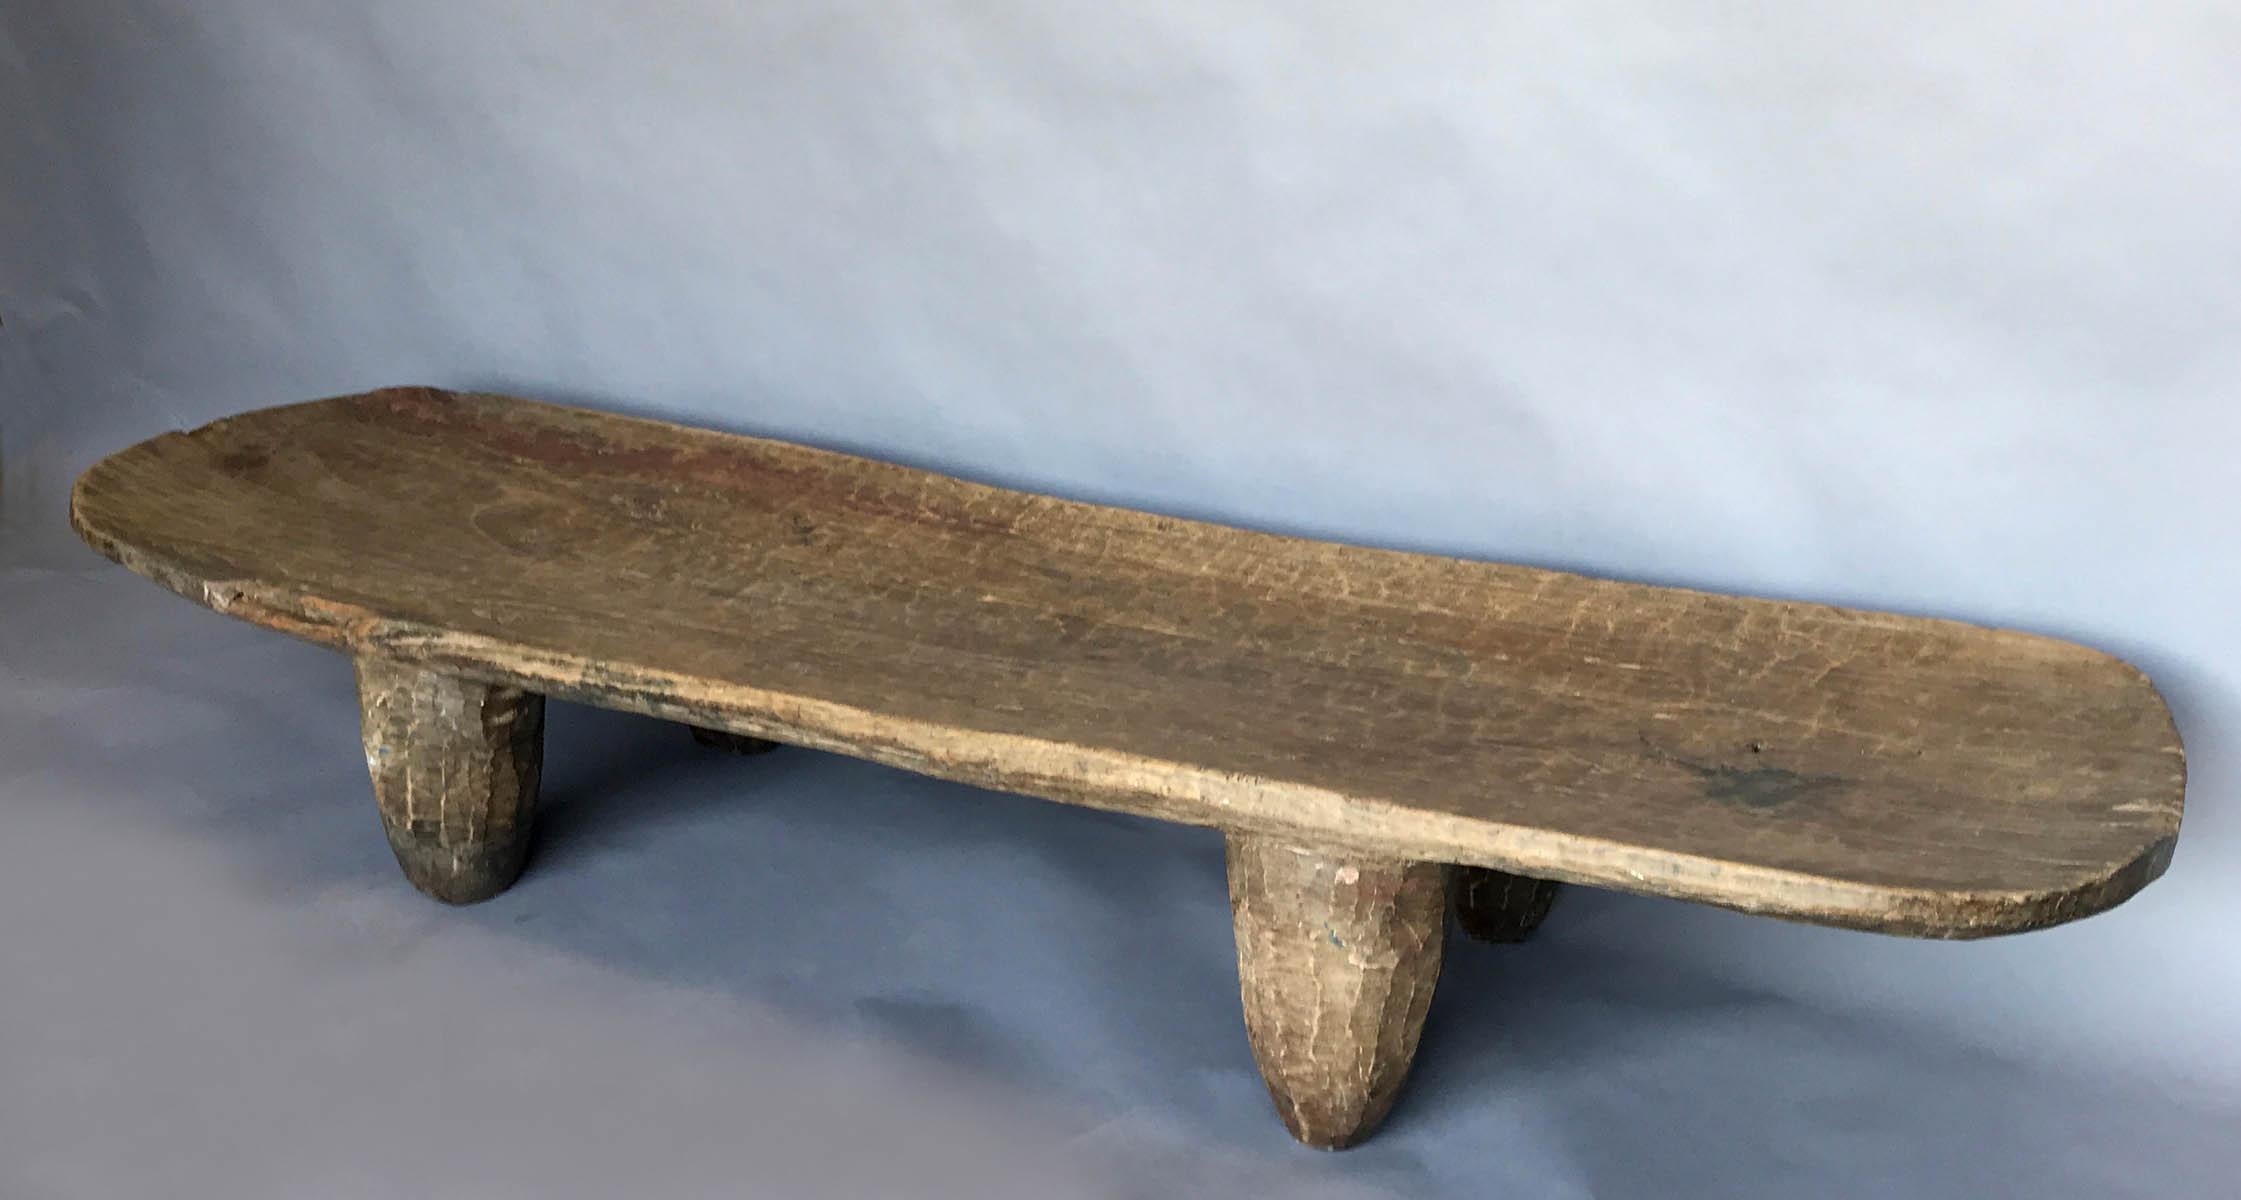 Hand carved out of one piece of wood with conical legs and a rounded rectangular top. From the Nupe tribe of Northern Nigeria. Rich brown patina. A piece has been nicked off the side a long time ago.